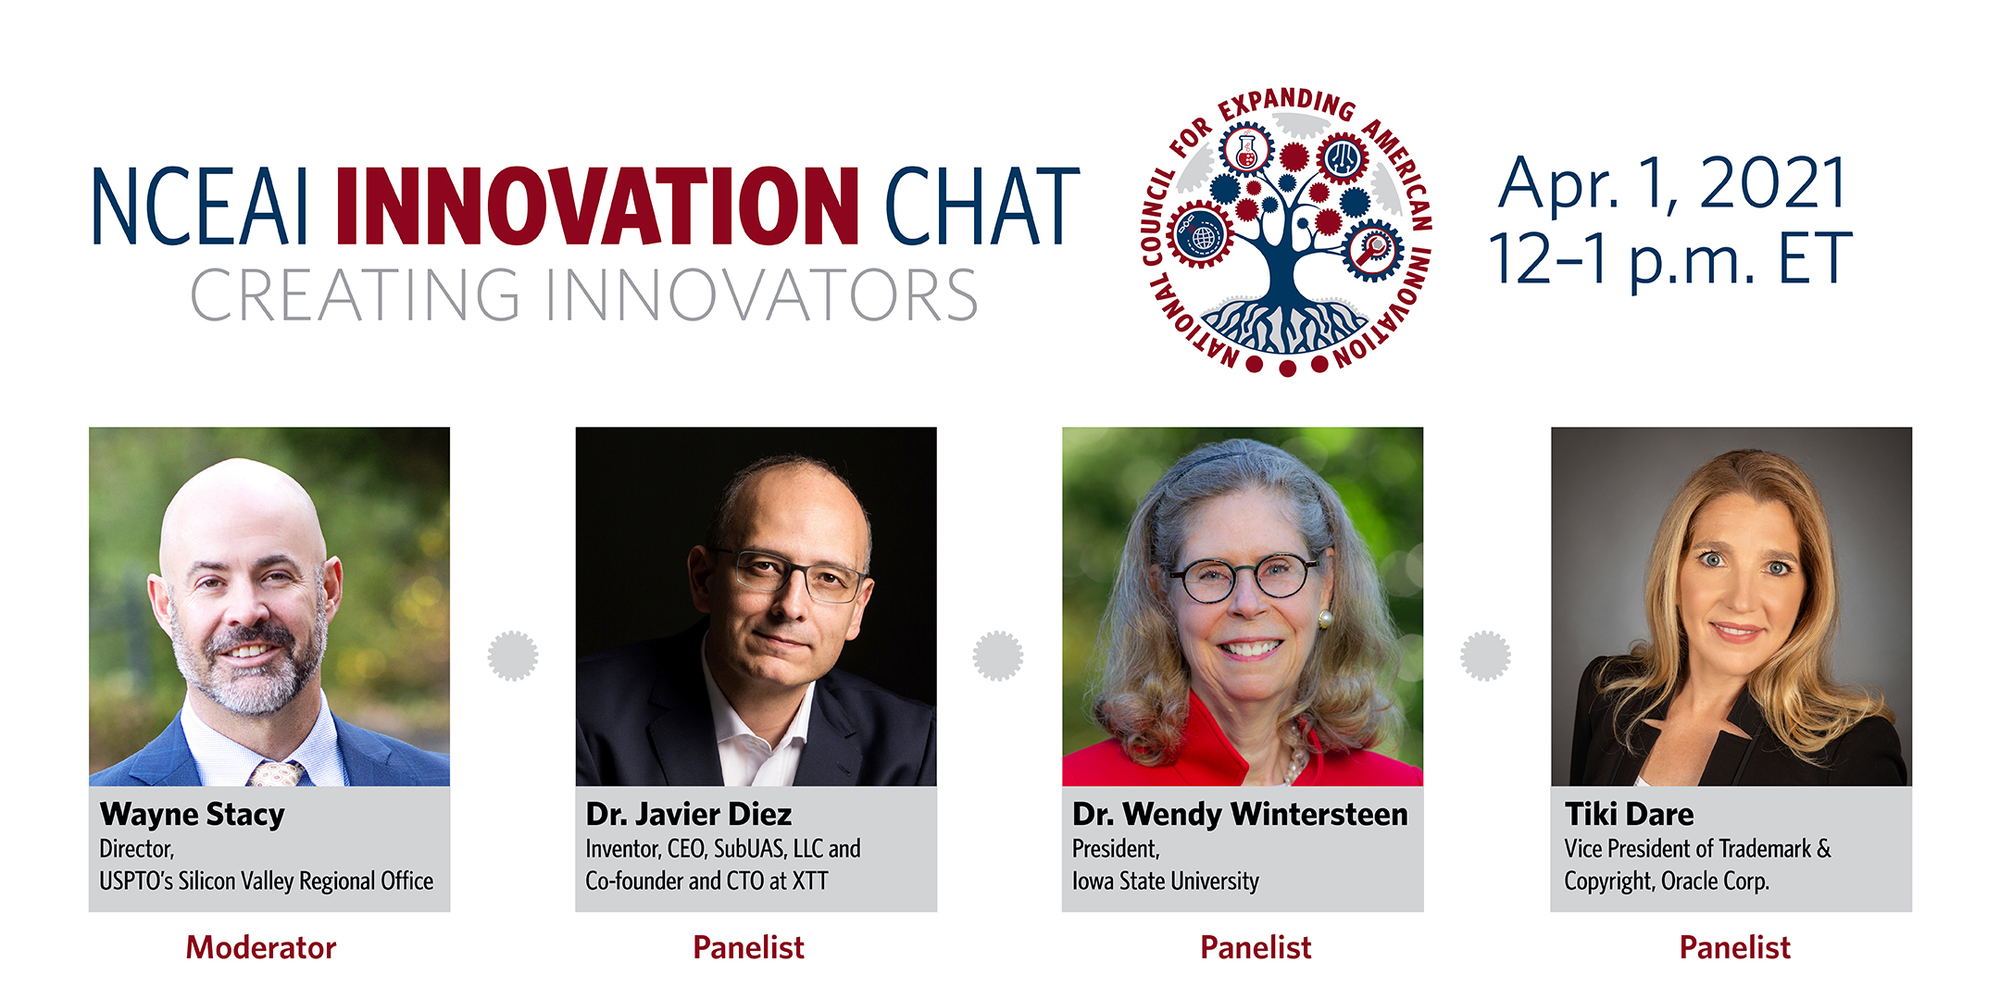 NCEAI innovation chat 